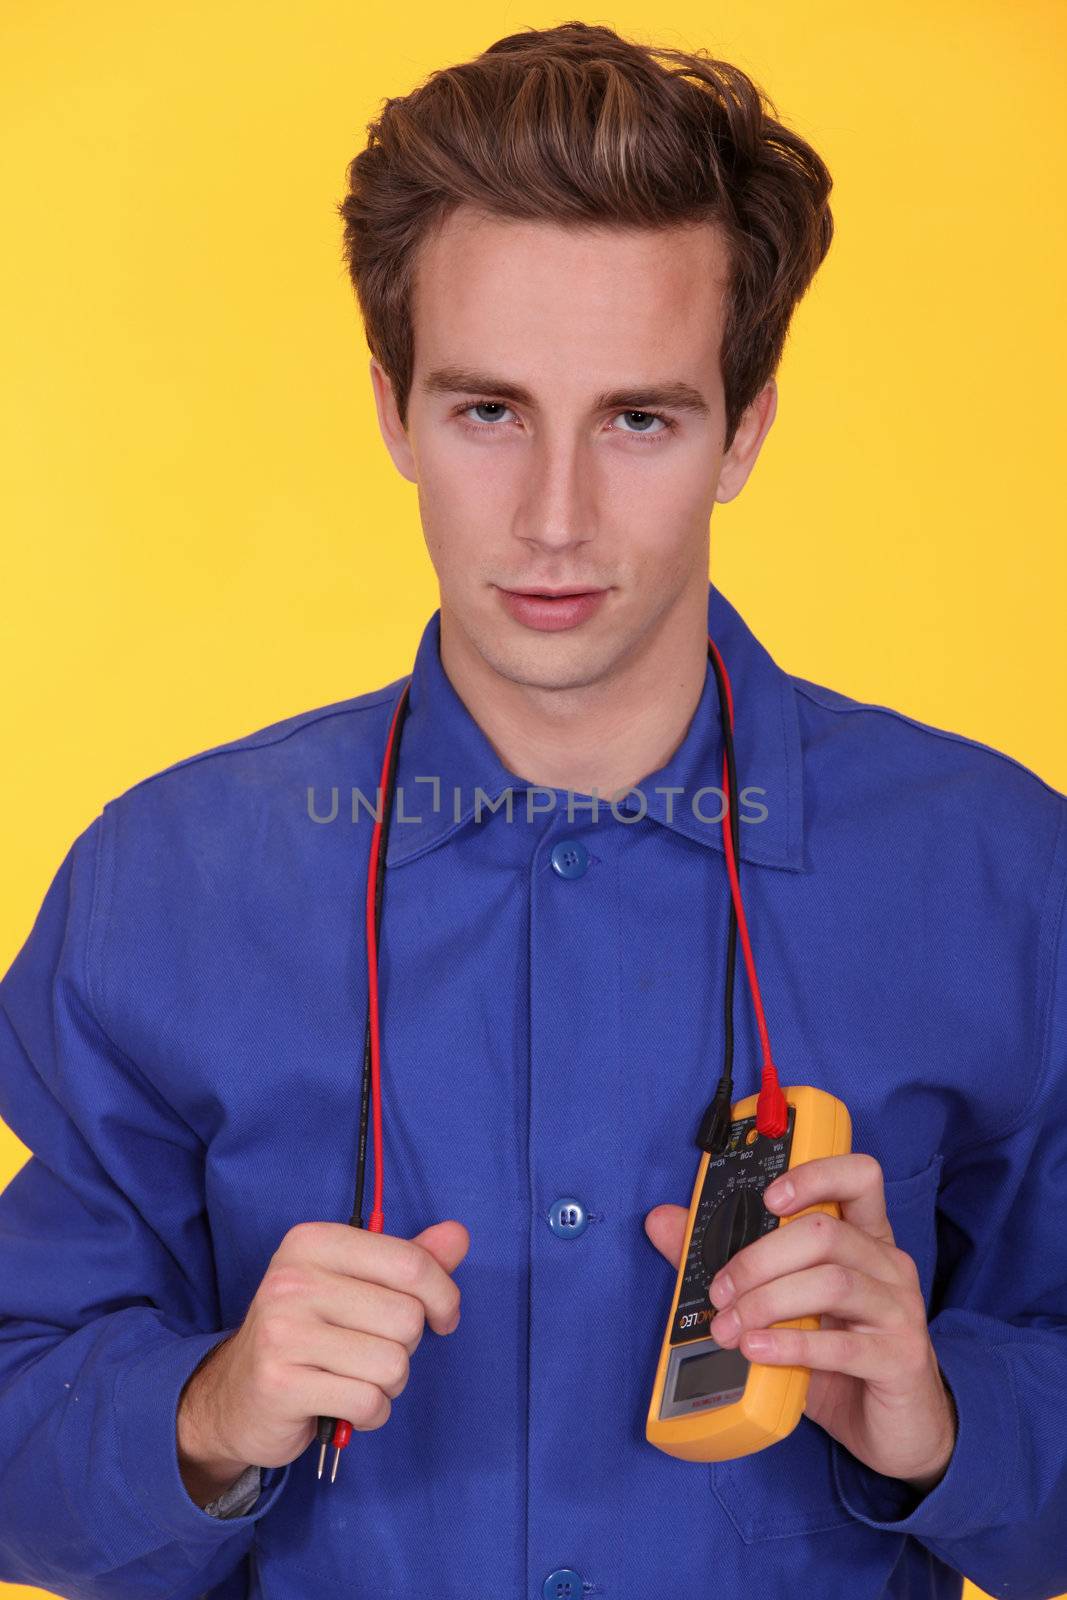 electrician holding a multimeter around his neck by phovoir